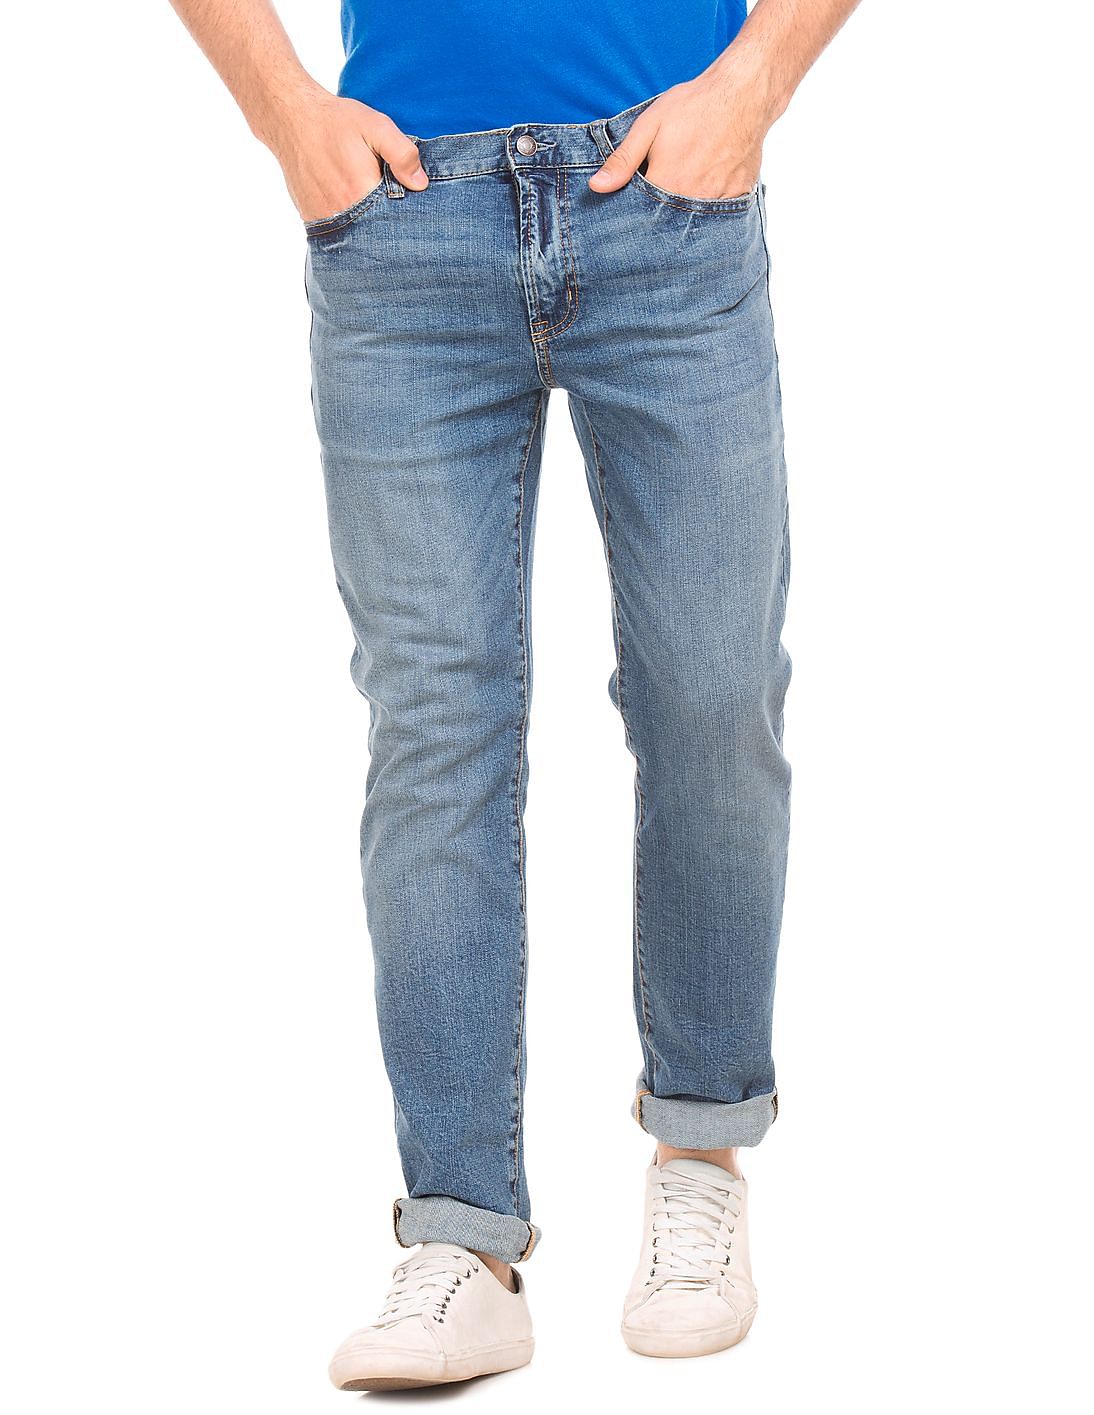 Buy Aeropostale Low Rise Slim Straight Fit Jeans - NNNOW.com